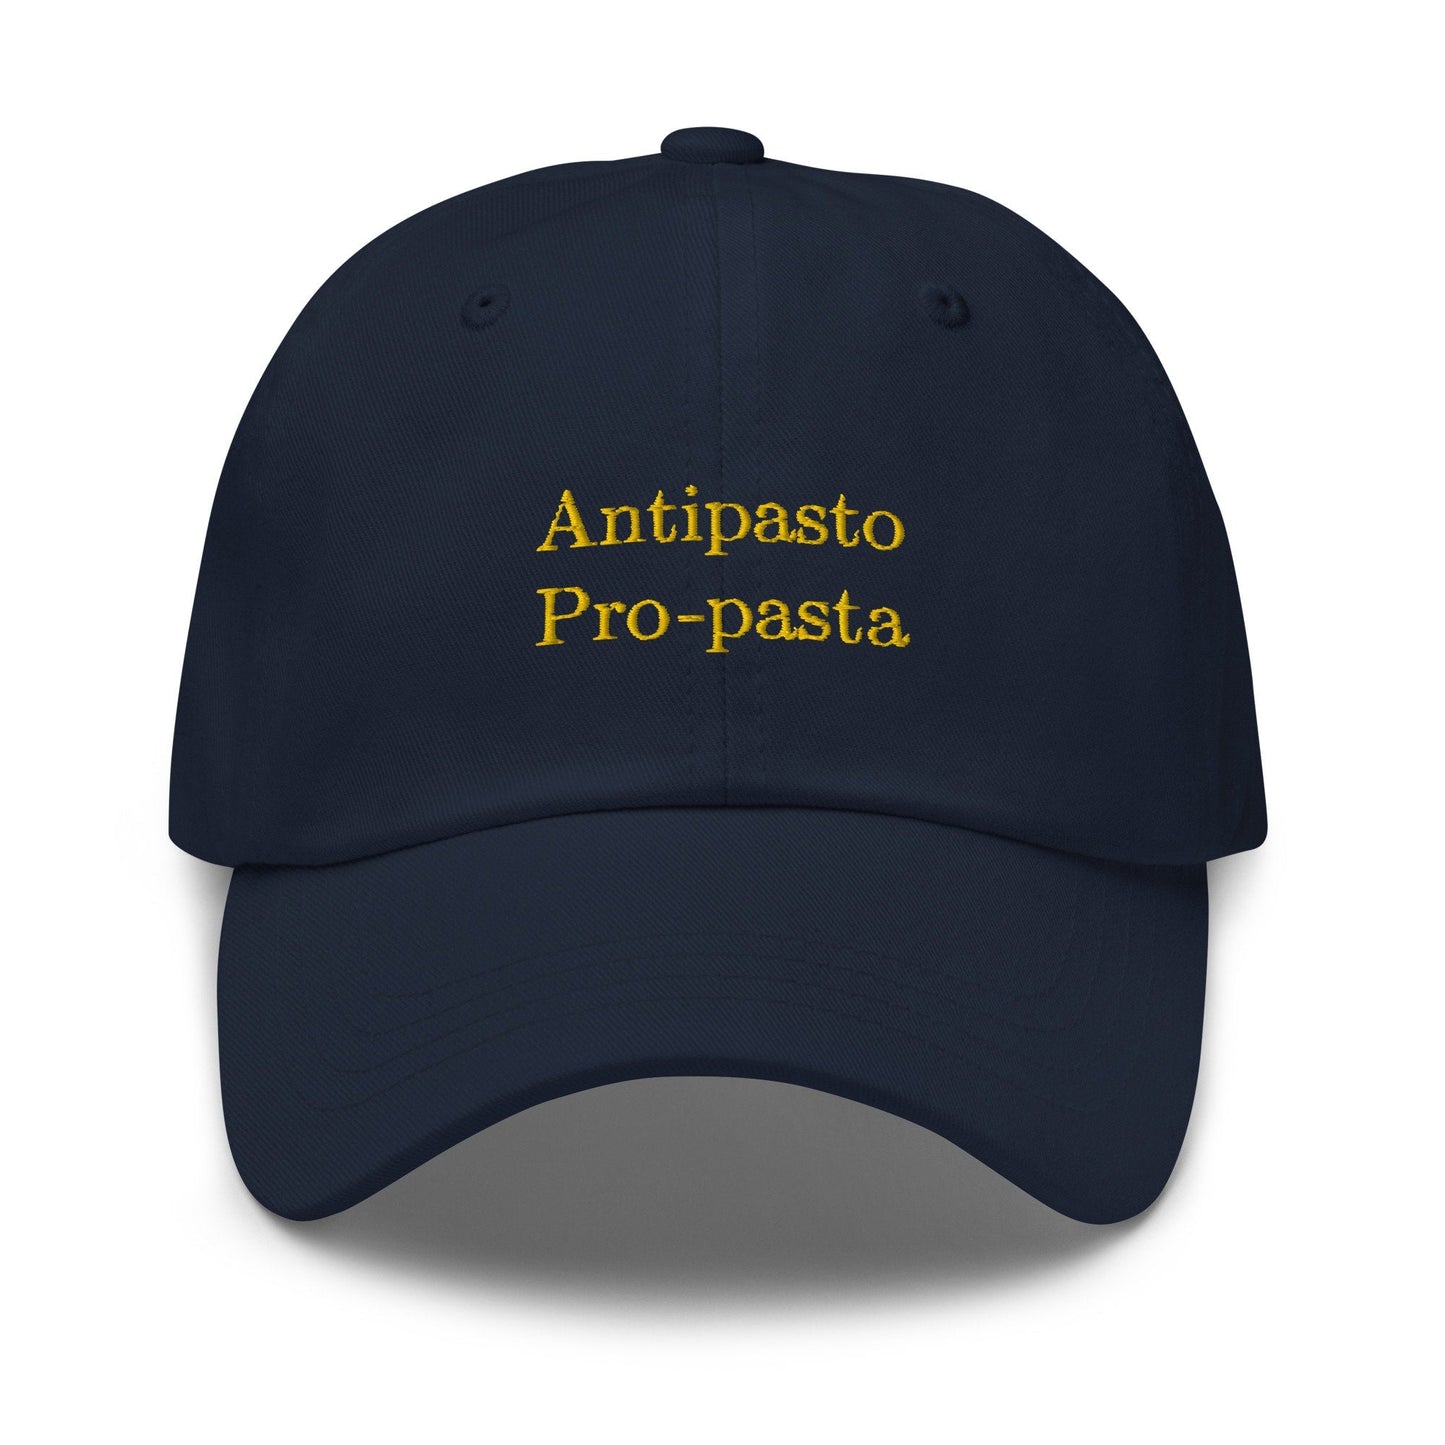 Pasta Dad Hat - The Duality of Man - Funny Foodie Gift - Antipasto, Pasta, and Italian Food Lovers - Embroidered Cap - Multiple Colors - Evilwater Originals